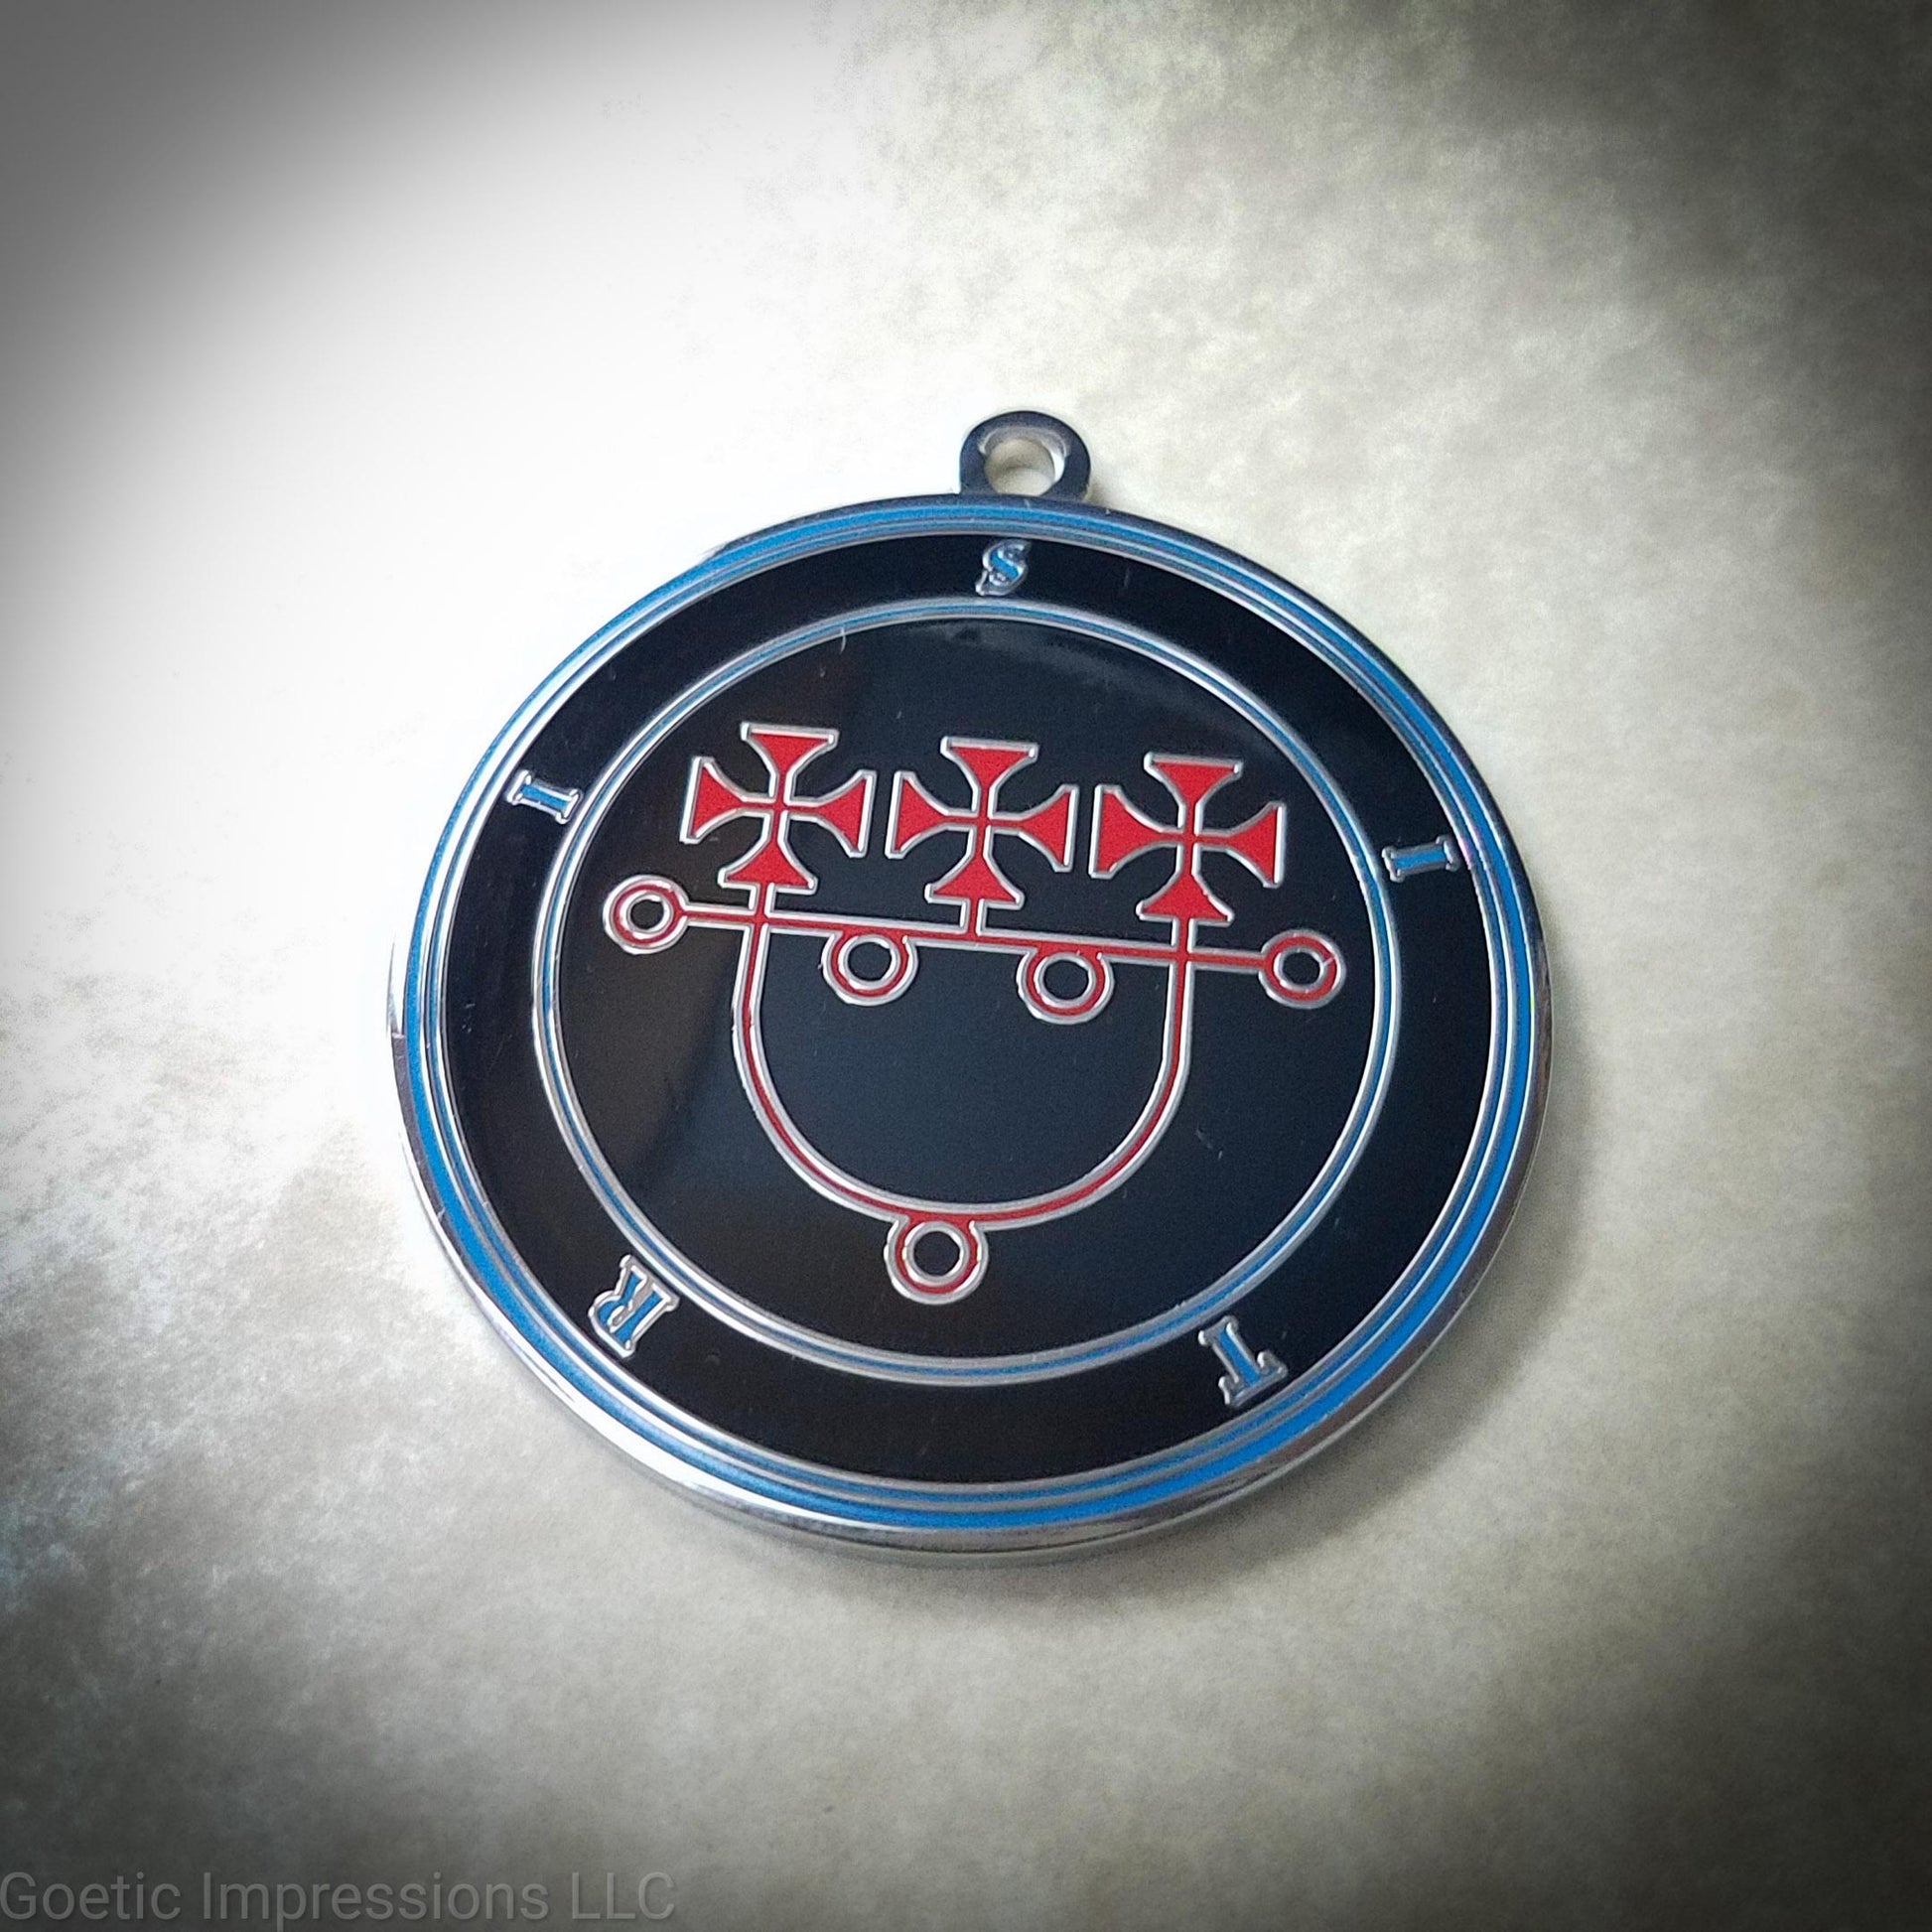 Talisman of the goetic spirit Sitri. The sigil is red on a black background and the text and circles are in blue.